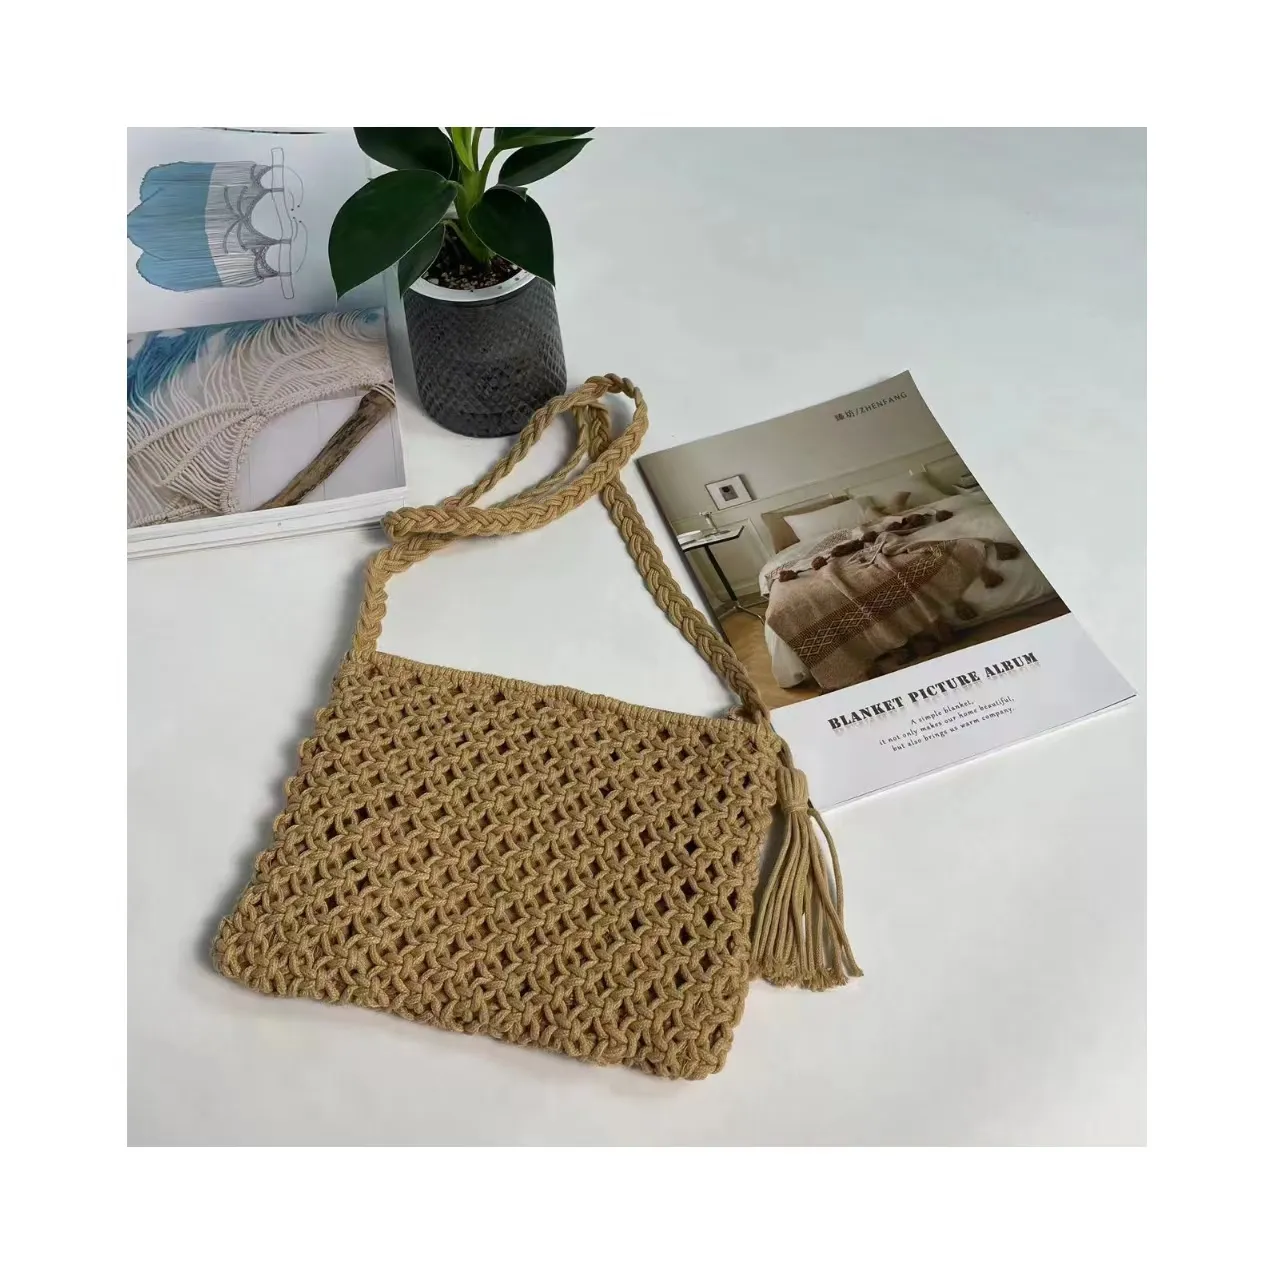 Handmade cotton rope women hand bags vintage tassels beach bags clutch purses and Crossbody Bags